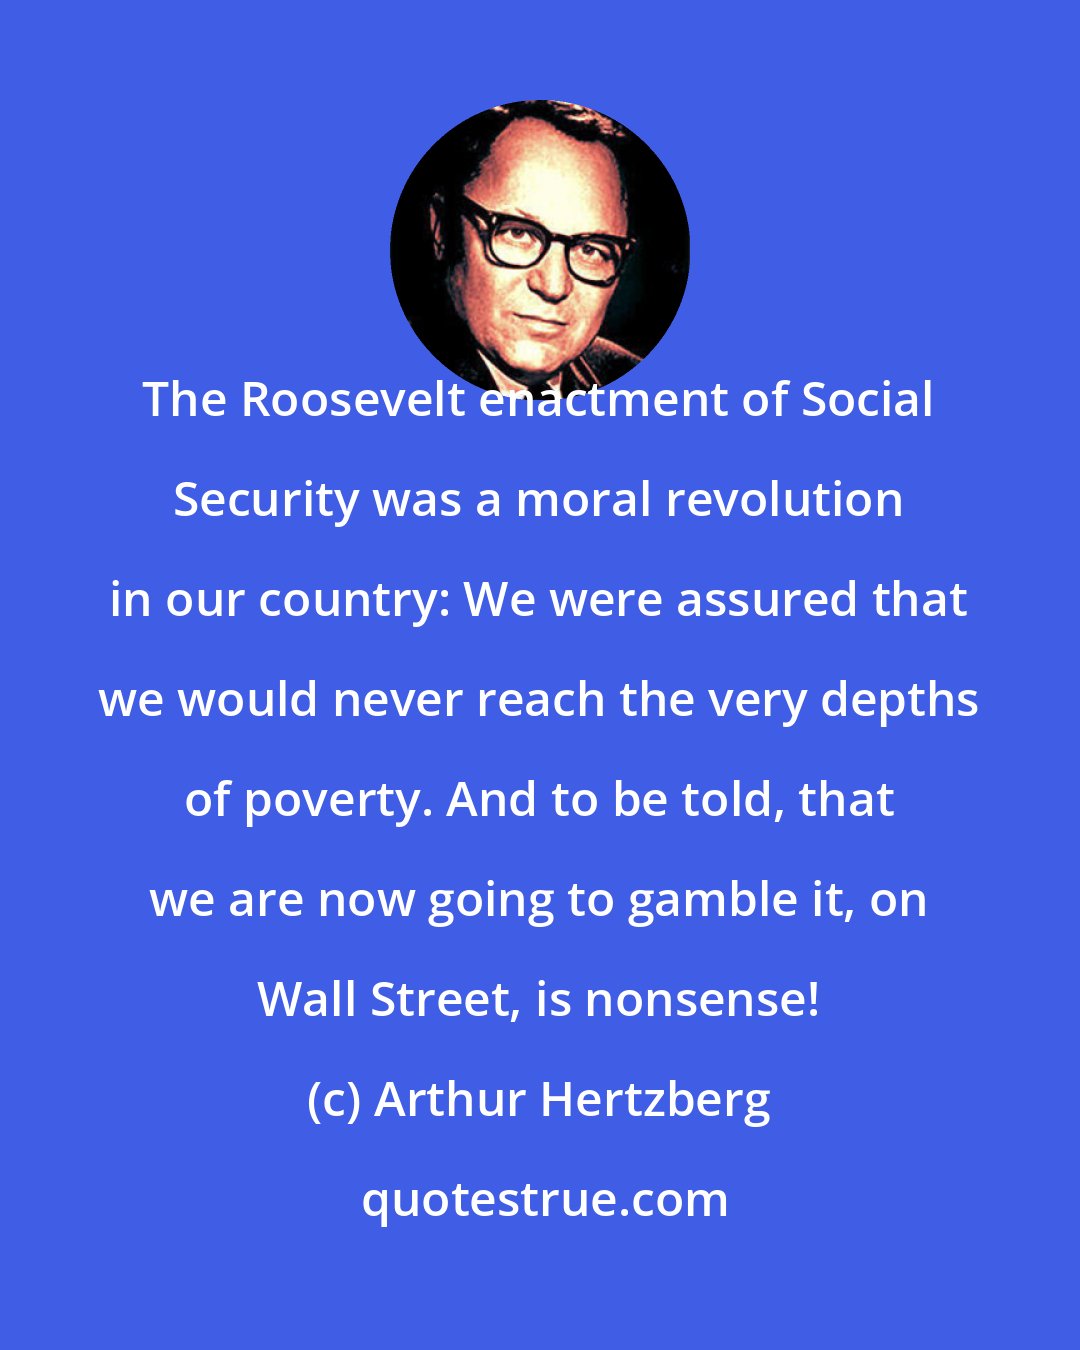 Arthur Hertzberg: The Roosevelt enactment of Social Security was a moral revolution in our country: We were assured that we would never reach the very depths of poverty. And to be told, that we are now going to gamble it, on Wall Street, is nonsense!